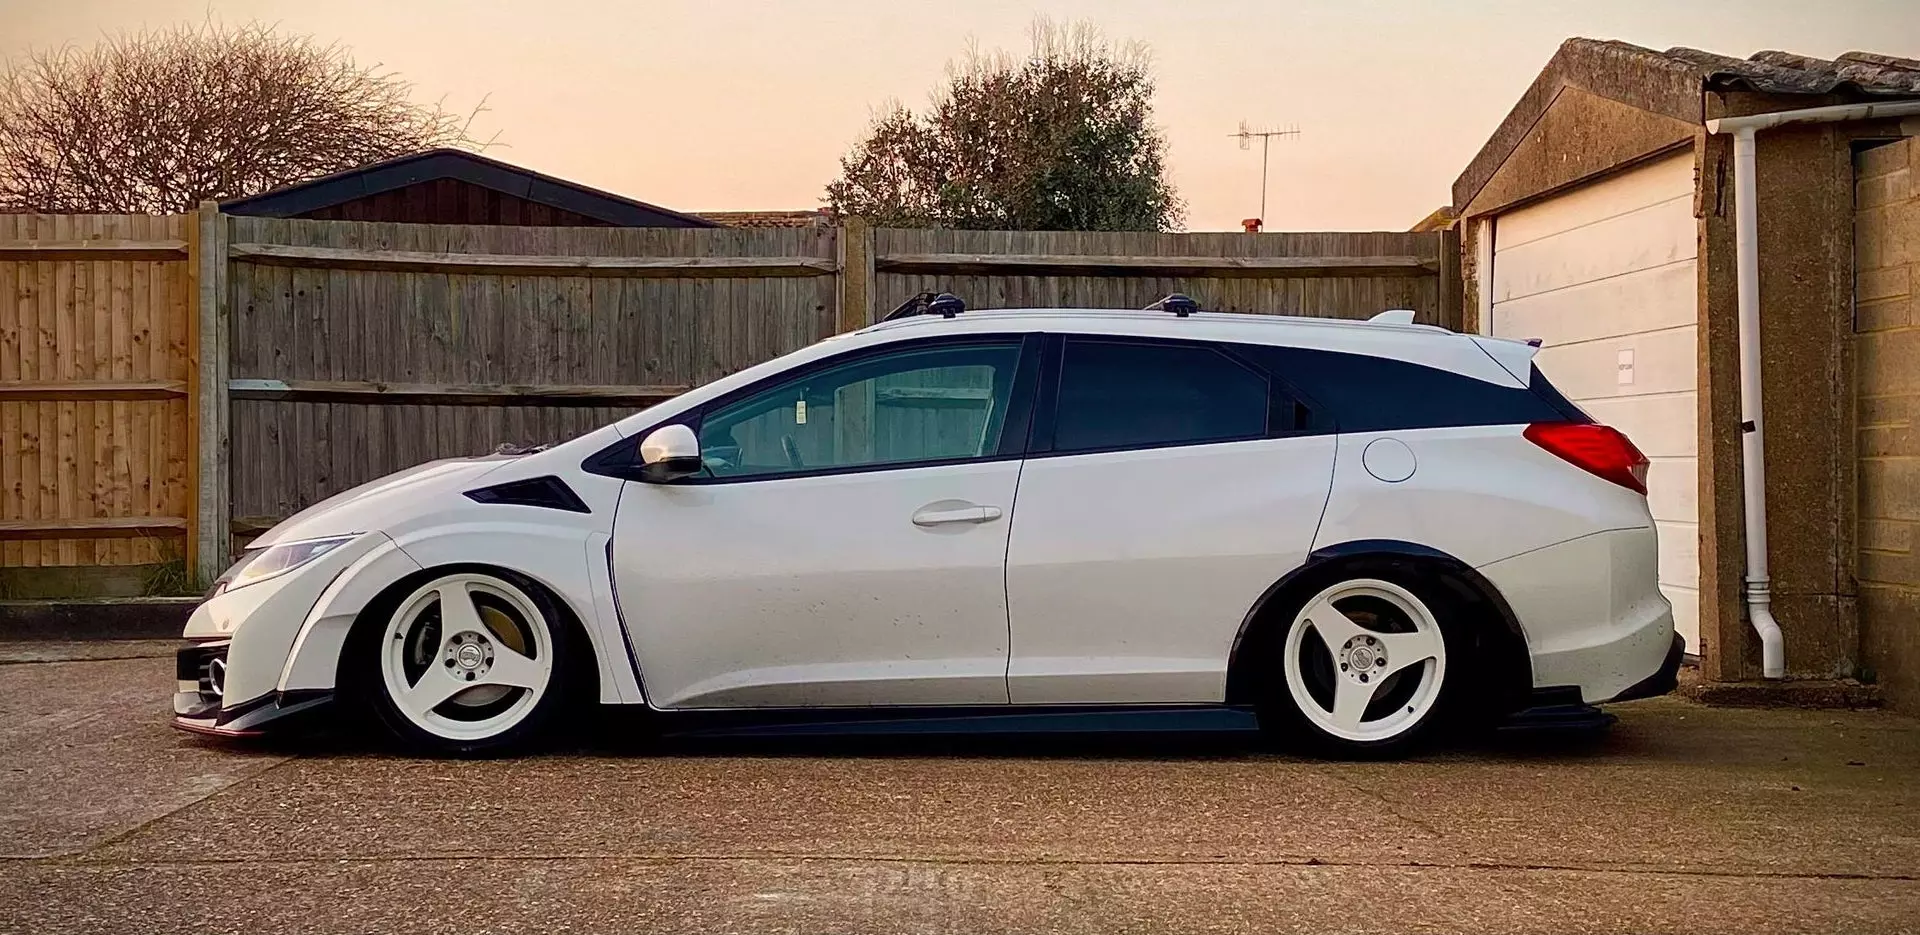 This 2015 Honda Civic Looks Like It Time-Travelled From 3015